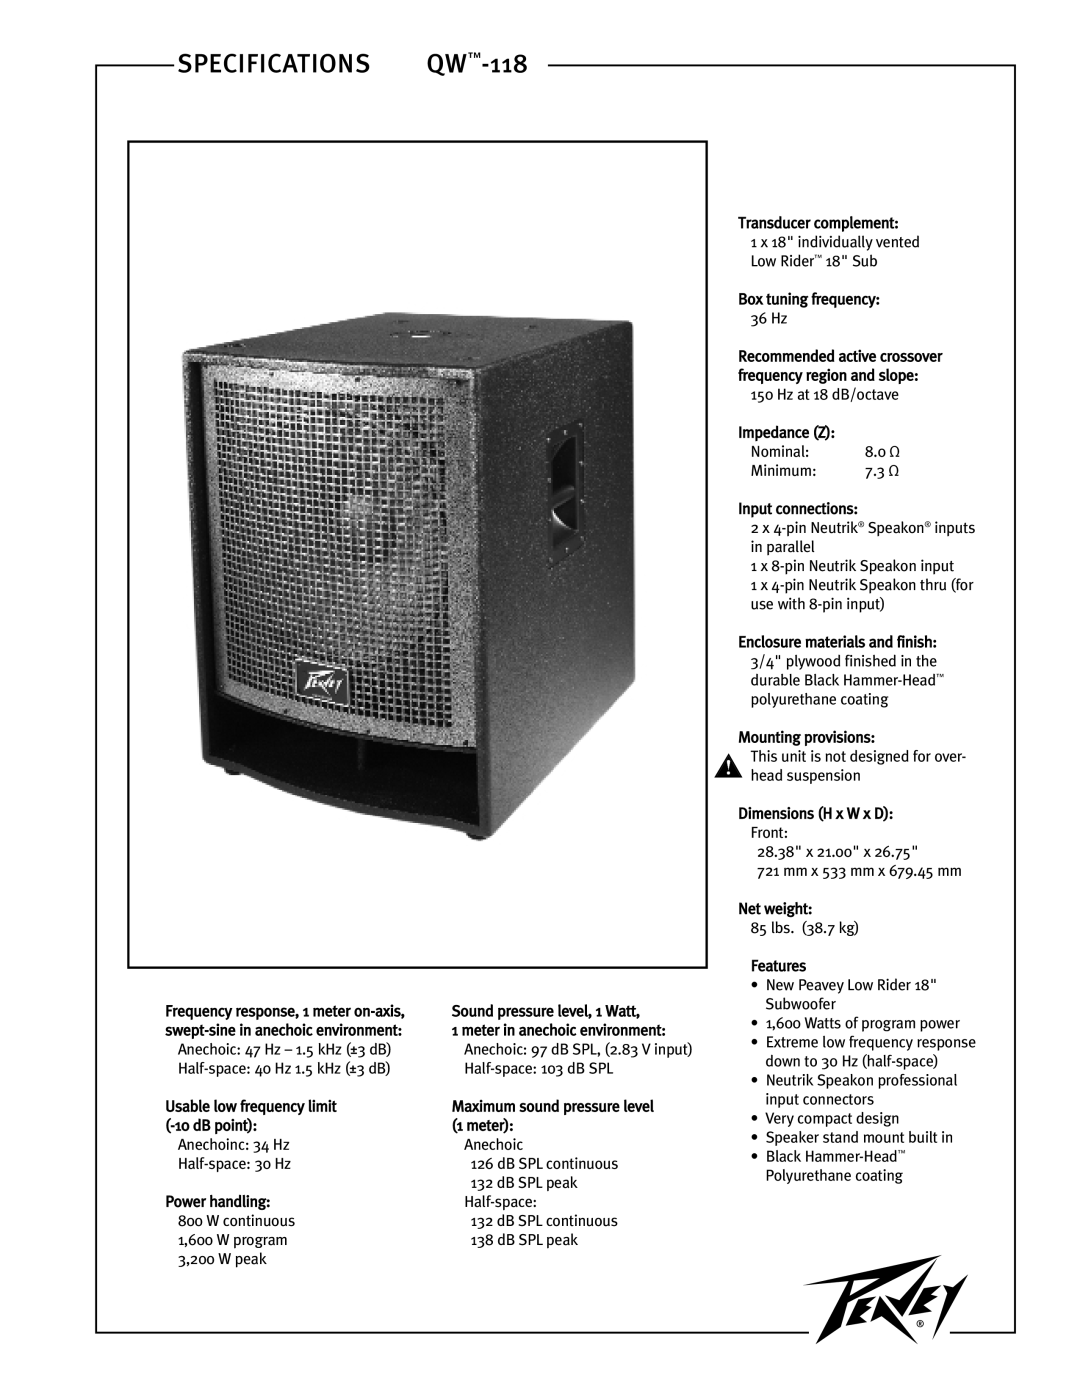 Peavey specifications SPECIFICATIONS QW-118, Listen To This 